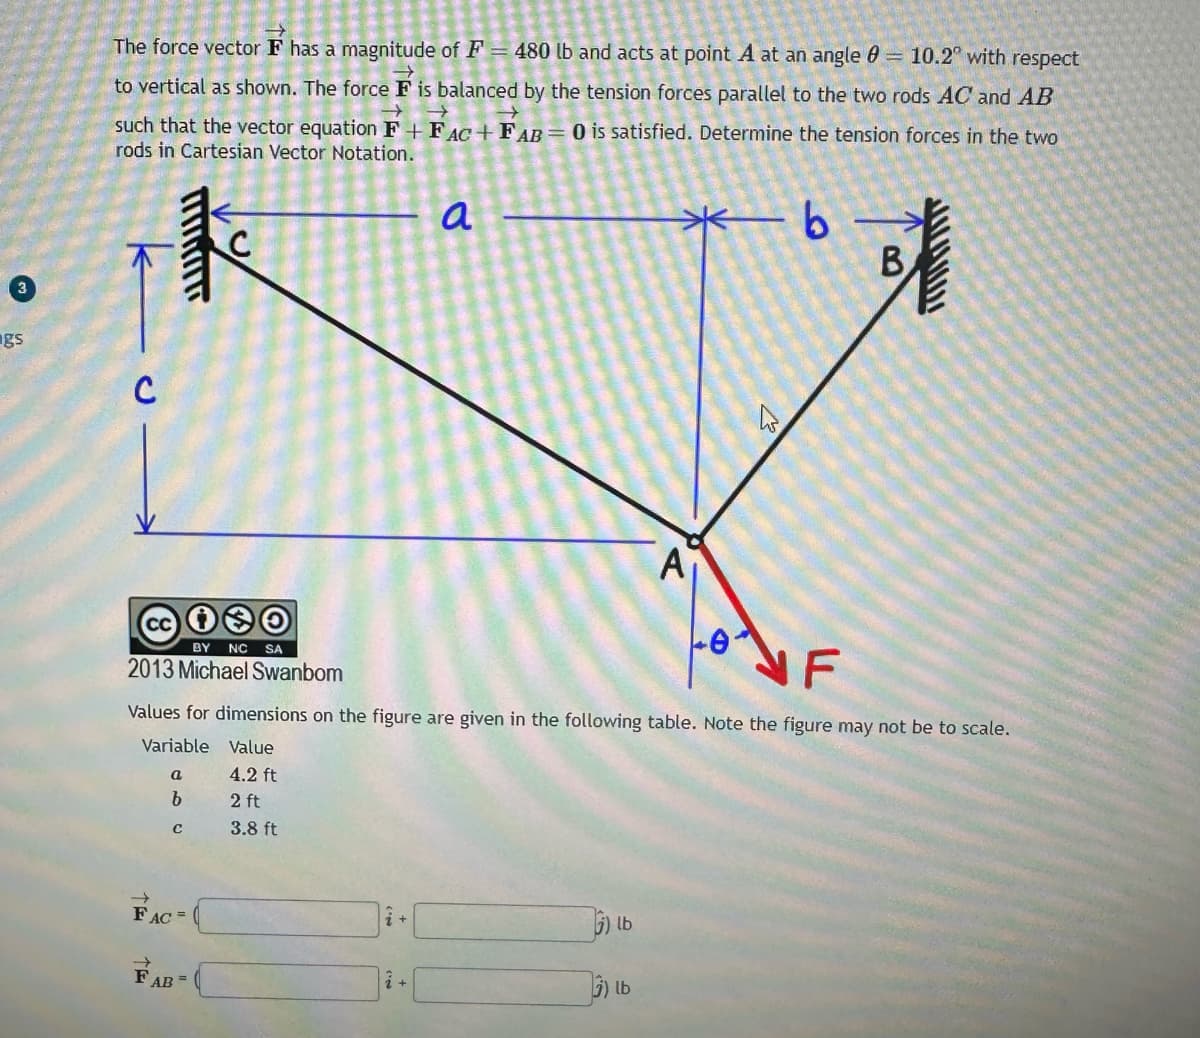 gs
The force vector F has a magnitude of F = 480 lb and acts at point A at an angle = 10.2° with respect
to vertical as shown. The force F is balanced by the tension forces parallel to the two rods AC and AB
→
→
such that the vector equation F+FAC+ FAB = 0 is satisfied. Determine the tension forces in the two
rods in Cartesian Vector Notation.
-b-
C
cc 1
BY NC SA
2013 Michael Swanbom
a
b
с
с
FAC=
NF
Values for dimensions on the figure are given in the following table. Note the figure may not be to scale.
Variable Value
4.2 ft
2 ft
3.8 ft
FAB=
a
i +
lb
A
3) lb
W
B